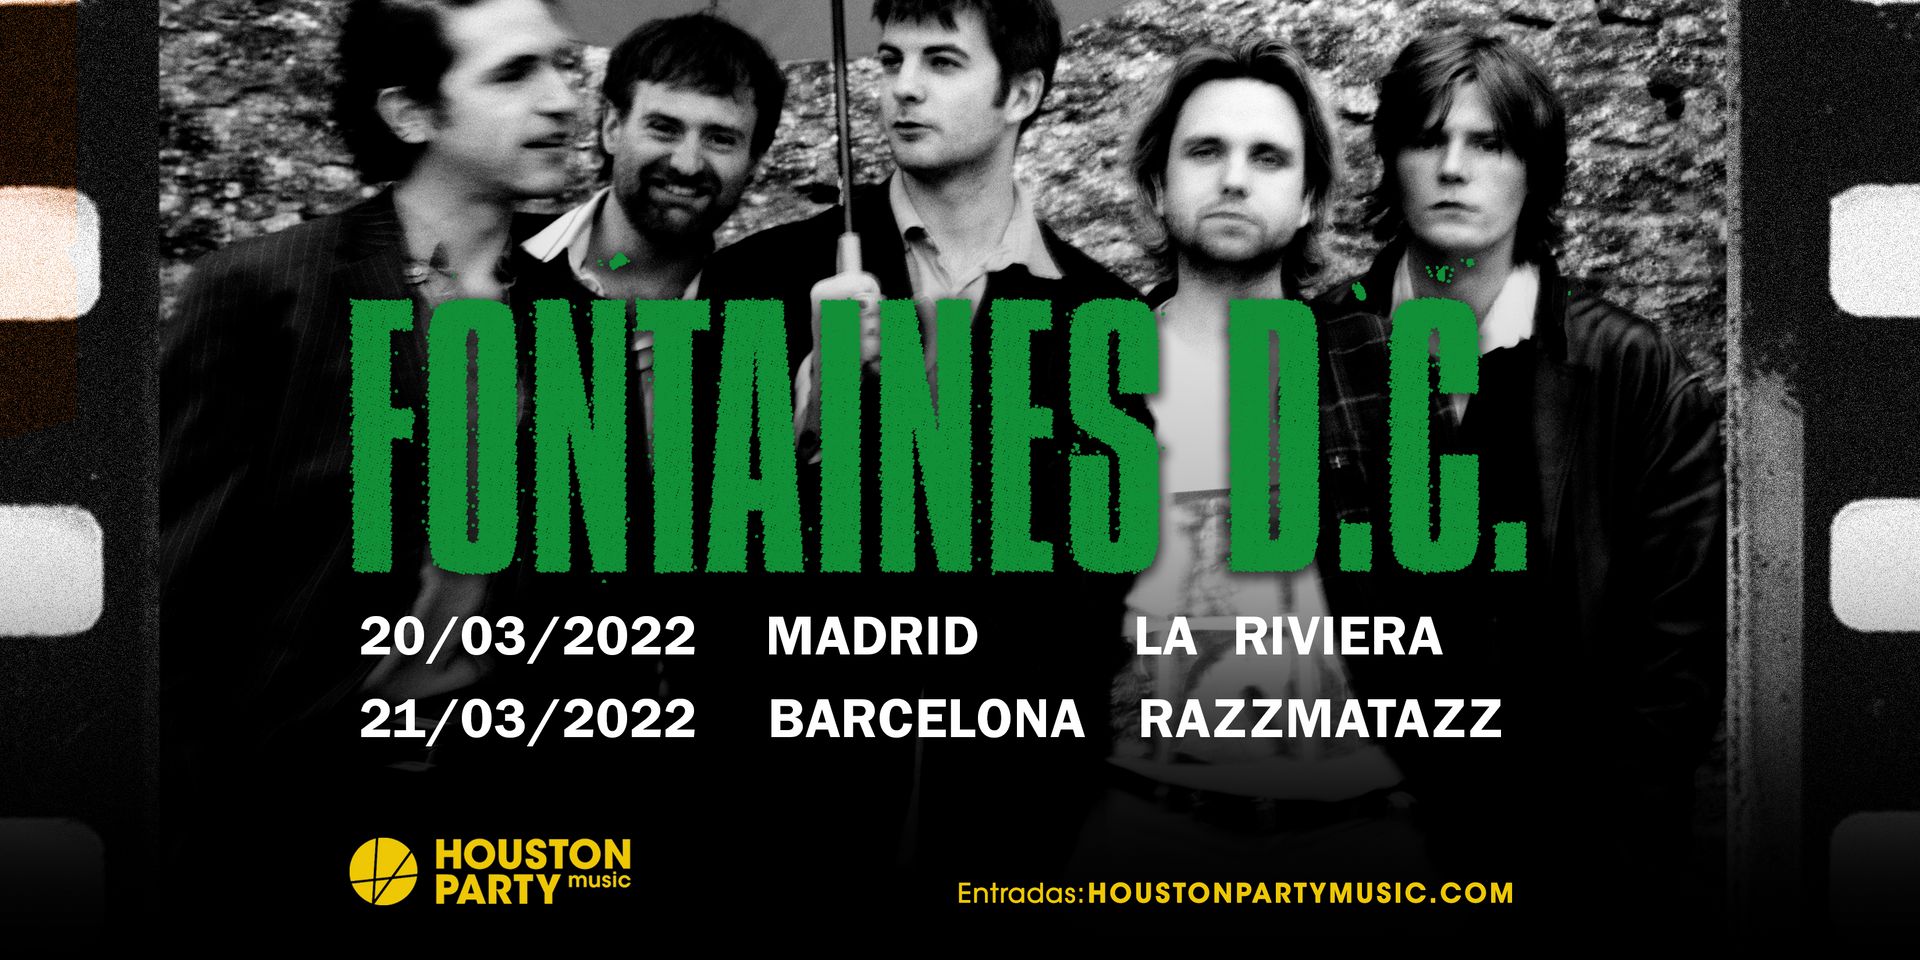 fontaines d.c. uk tour 2022 support